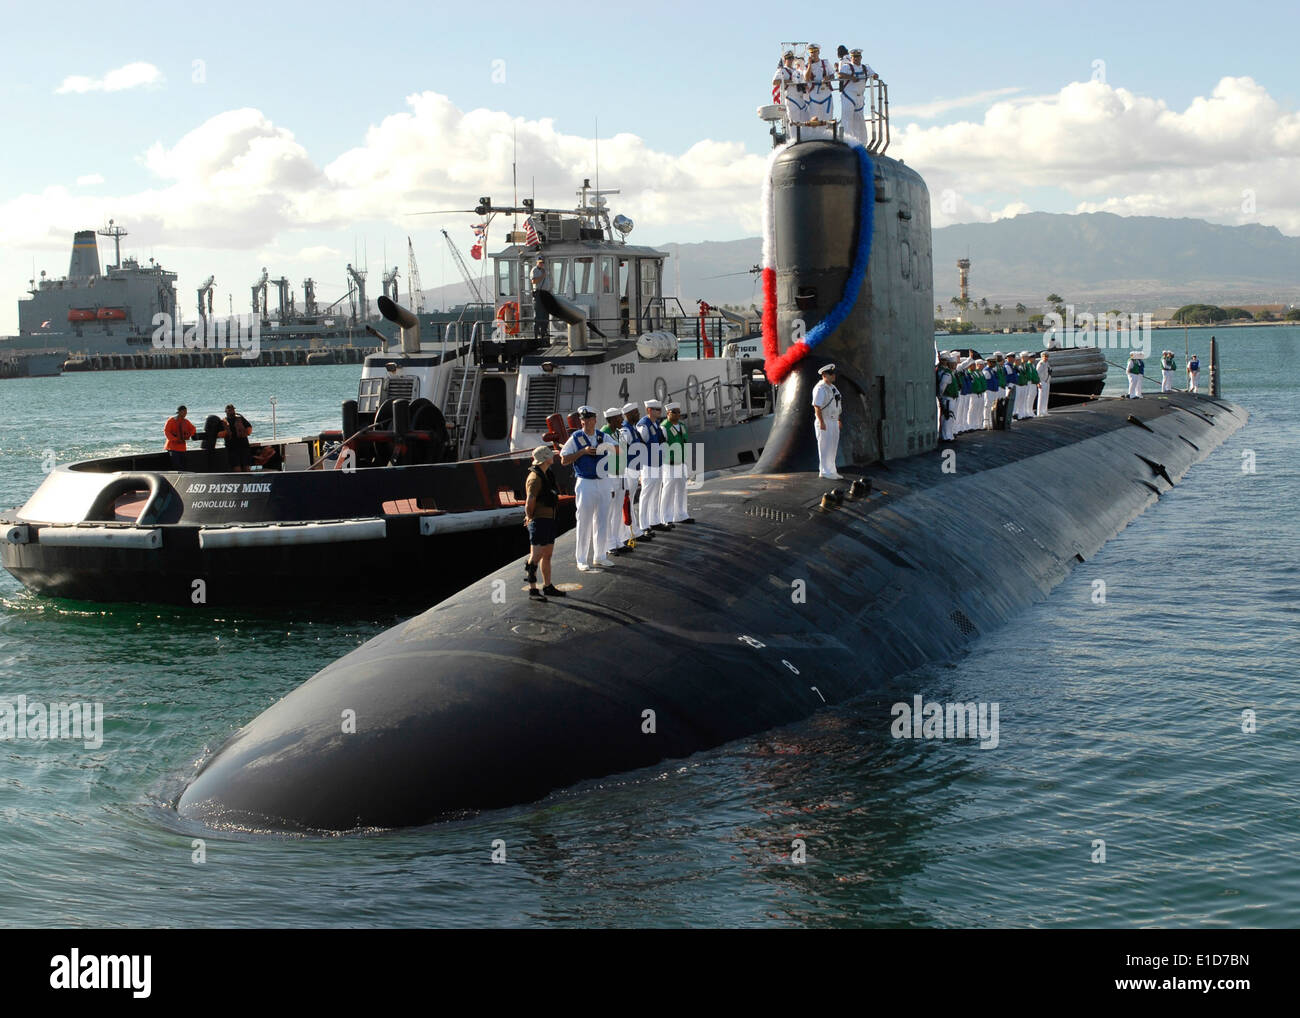 The Virginia-class submarine USS Texas (SSN 775) arrives at its new home port in Naval Station Pearl Harbor, Hawaii, Nov. 23, 2 Stock Photo